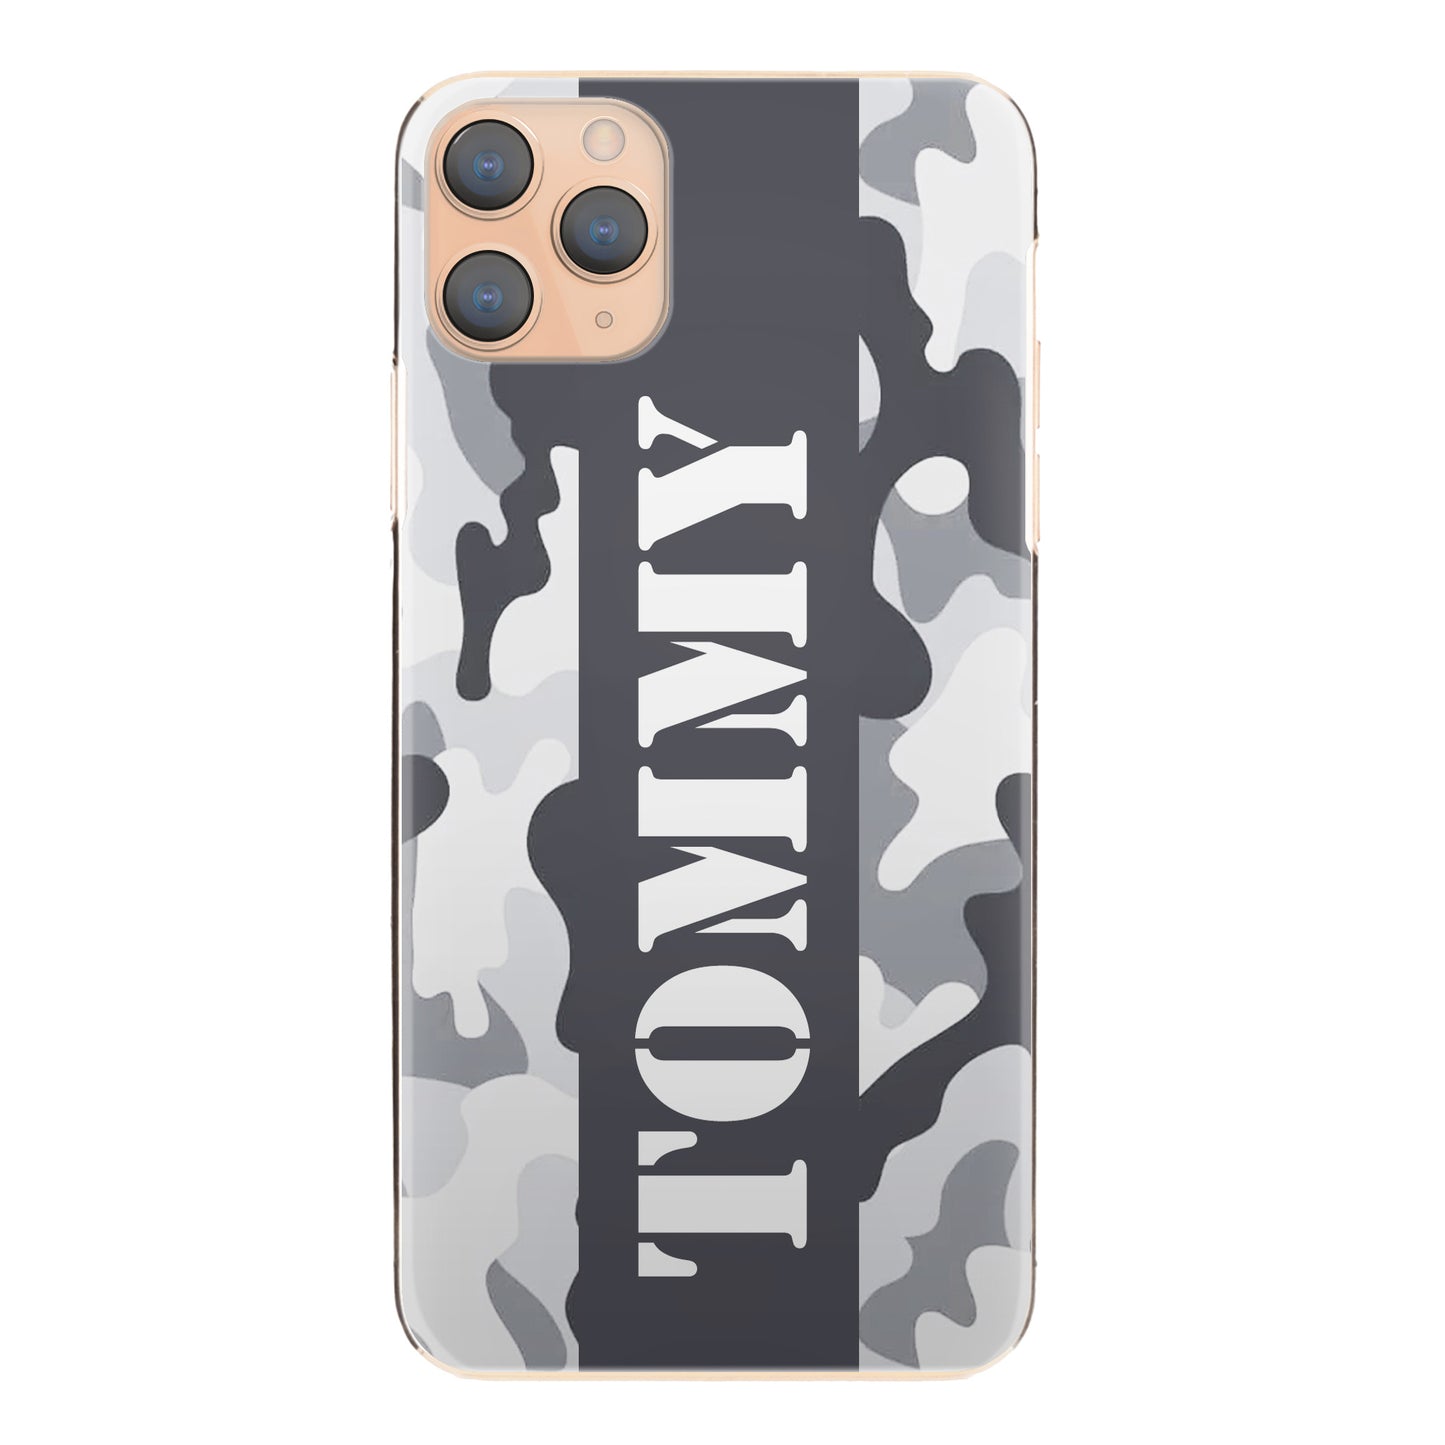 Personalised Sony Phone Hard Case with Military Text on Artic Camo